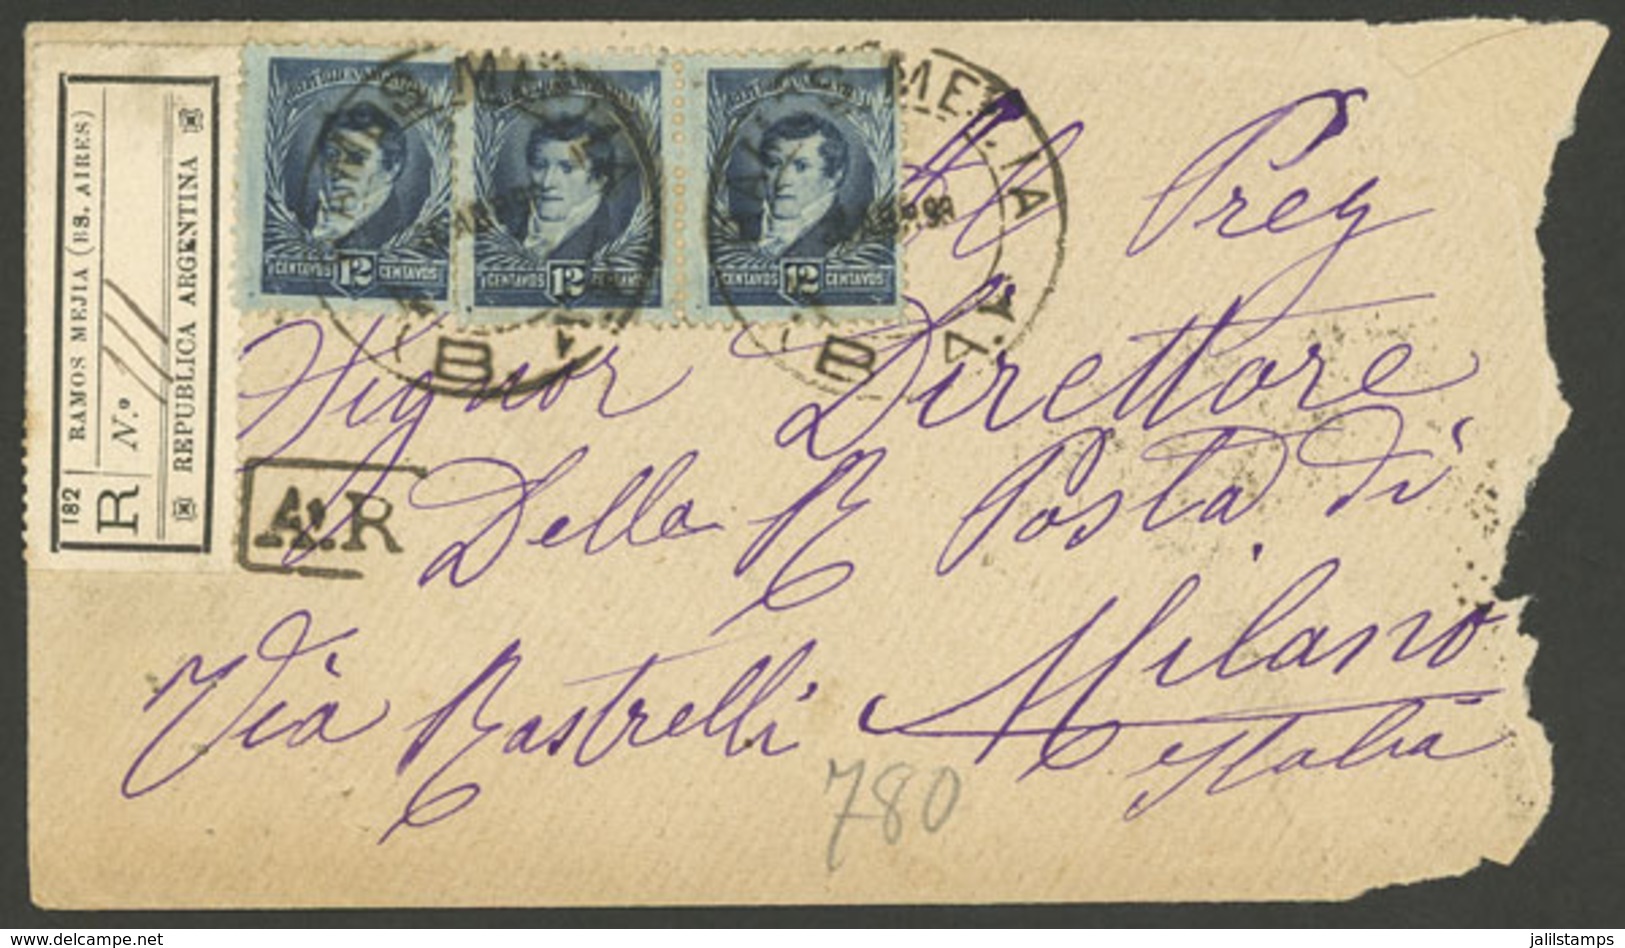 ARGENTINA: Registered Cover Sent From Ramos Mejia (Buenos Aires) To Milano (Italy) On 26/AP/1898, Franked With 12c. Belg - Brieven En Documenten